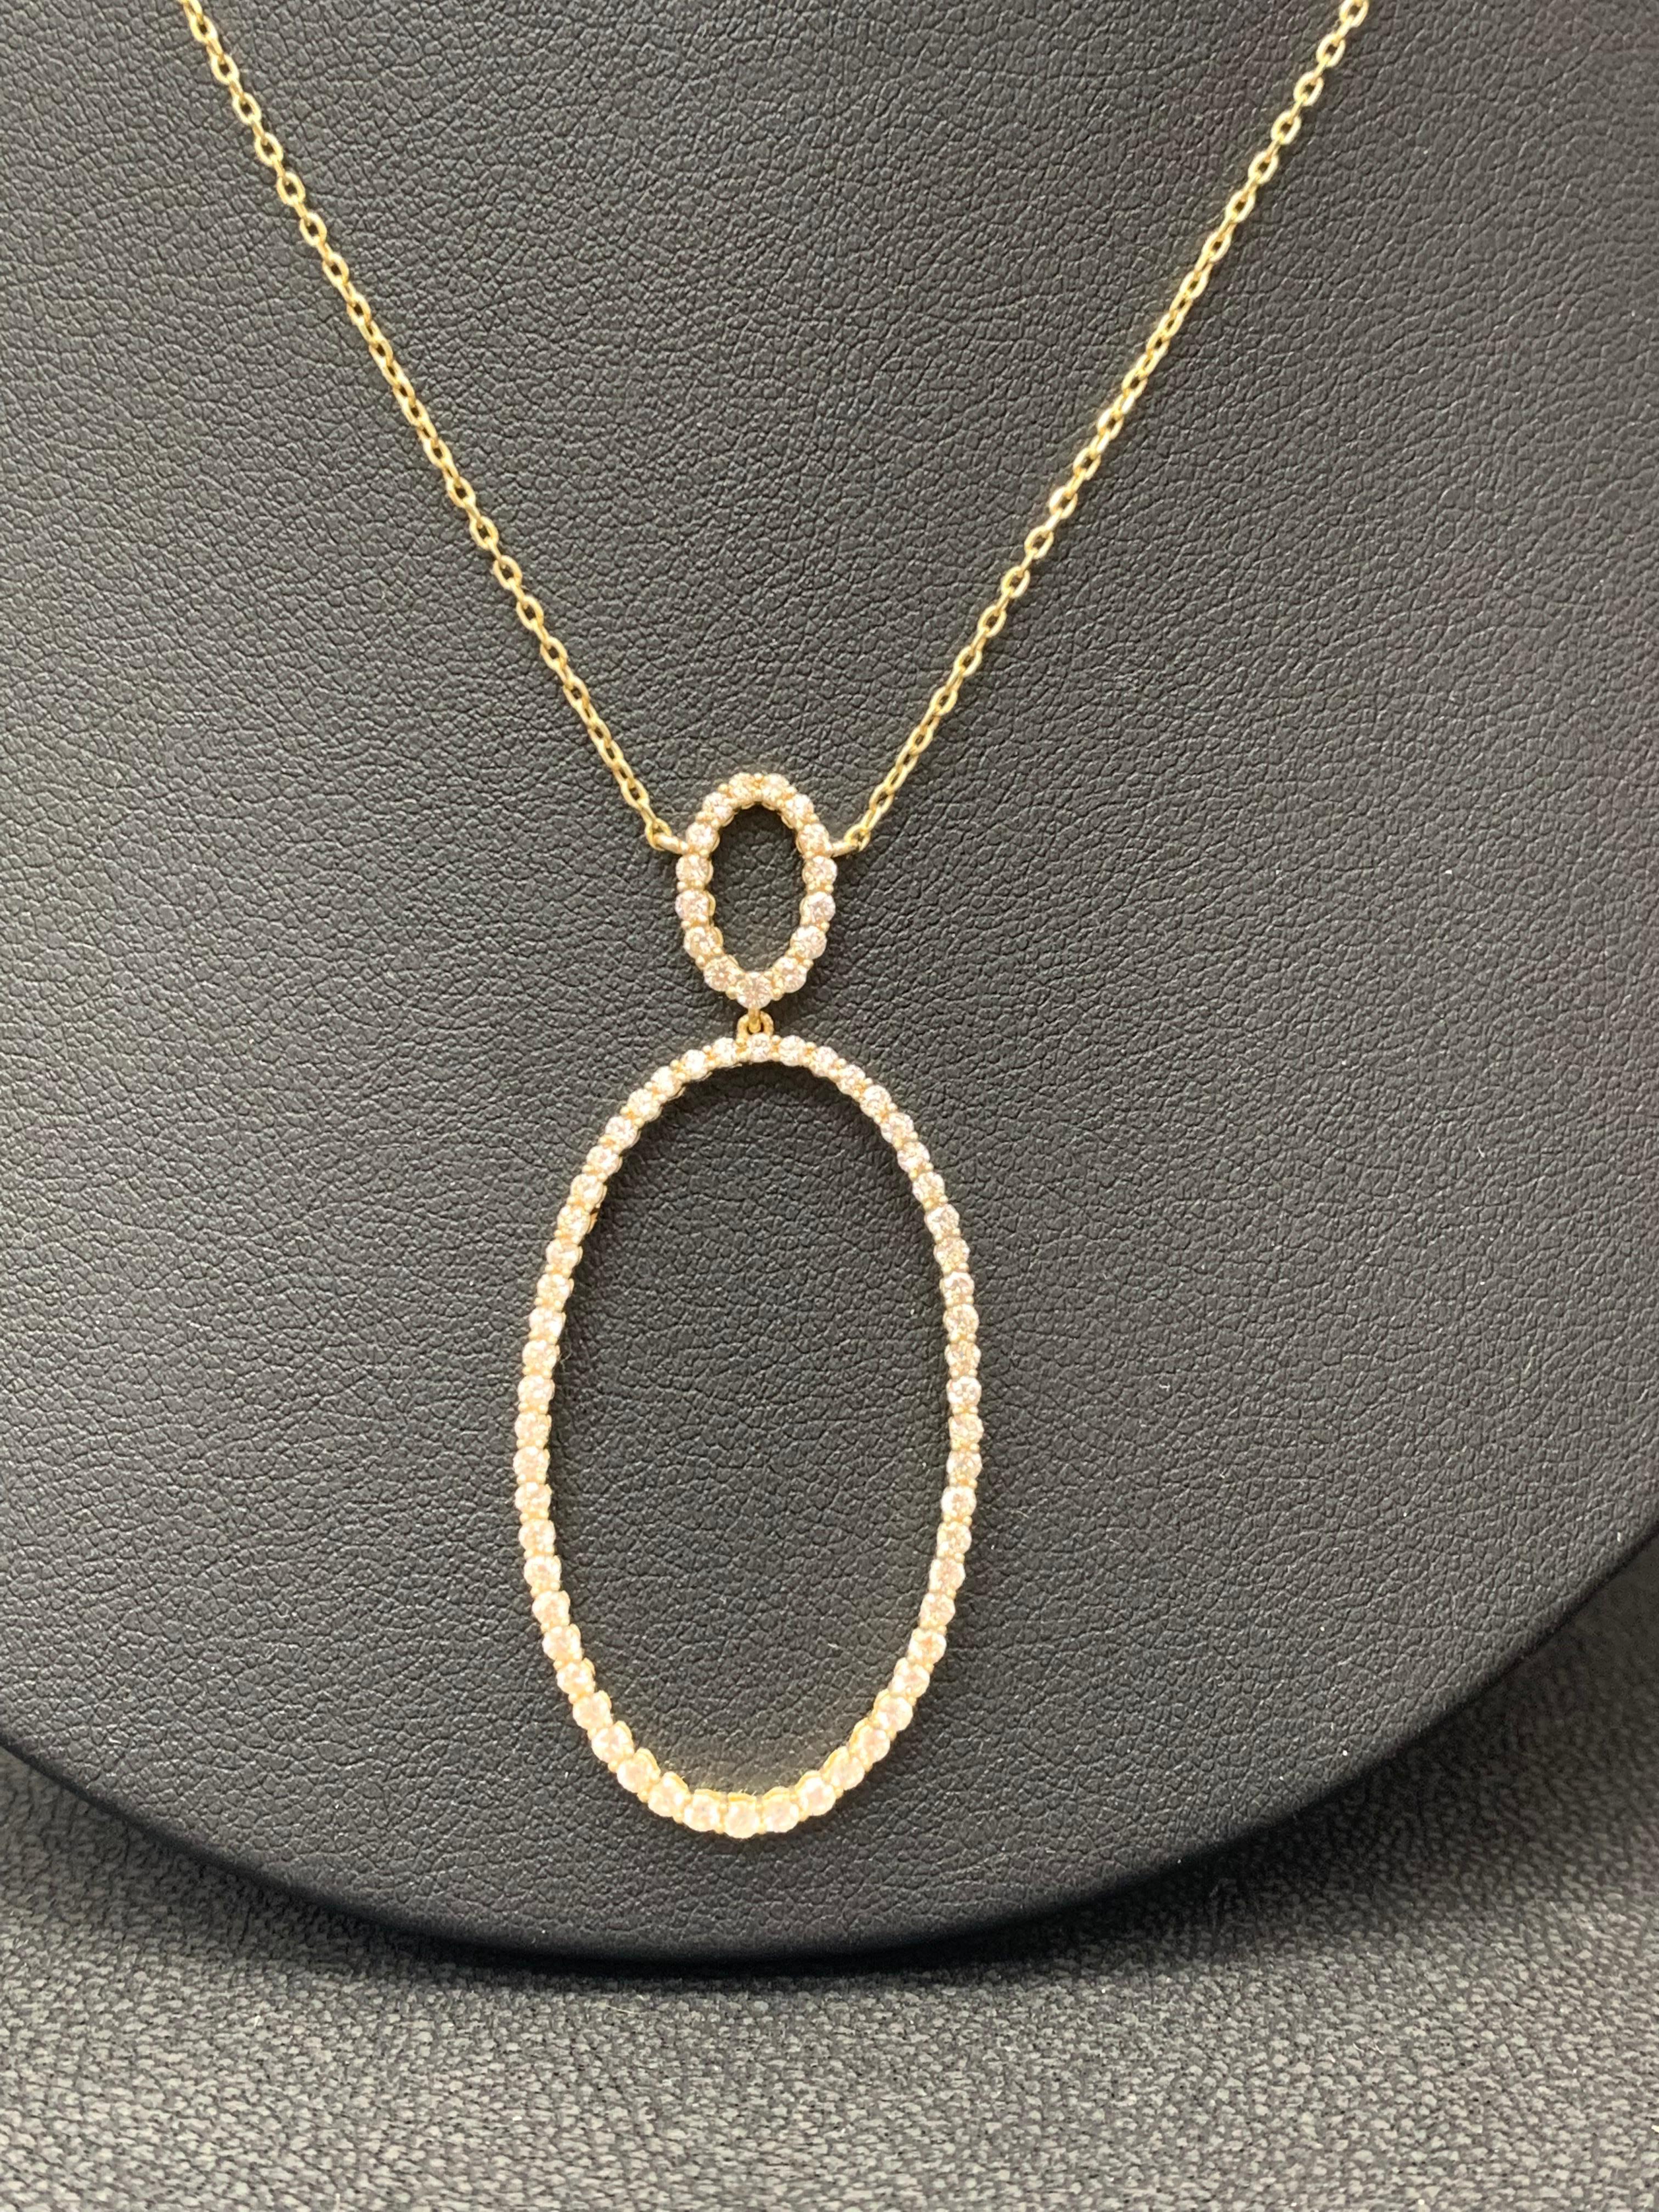 Features an open work oval design pendant accented with round brilliant diamonds. 69 Diamonds weigh 1.21 carats total. Made in 18K Yellow Gold. 18 inch chain.